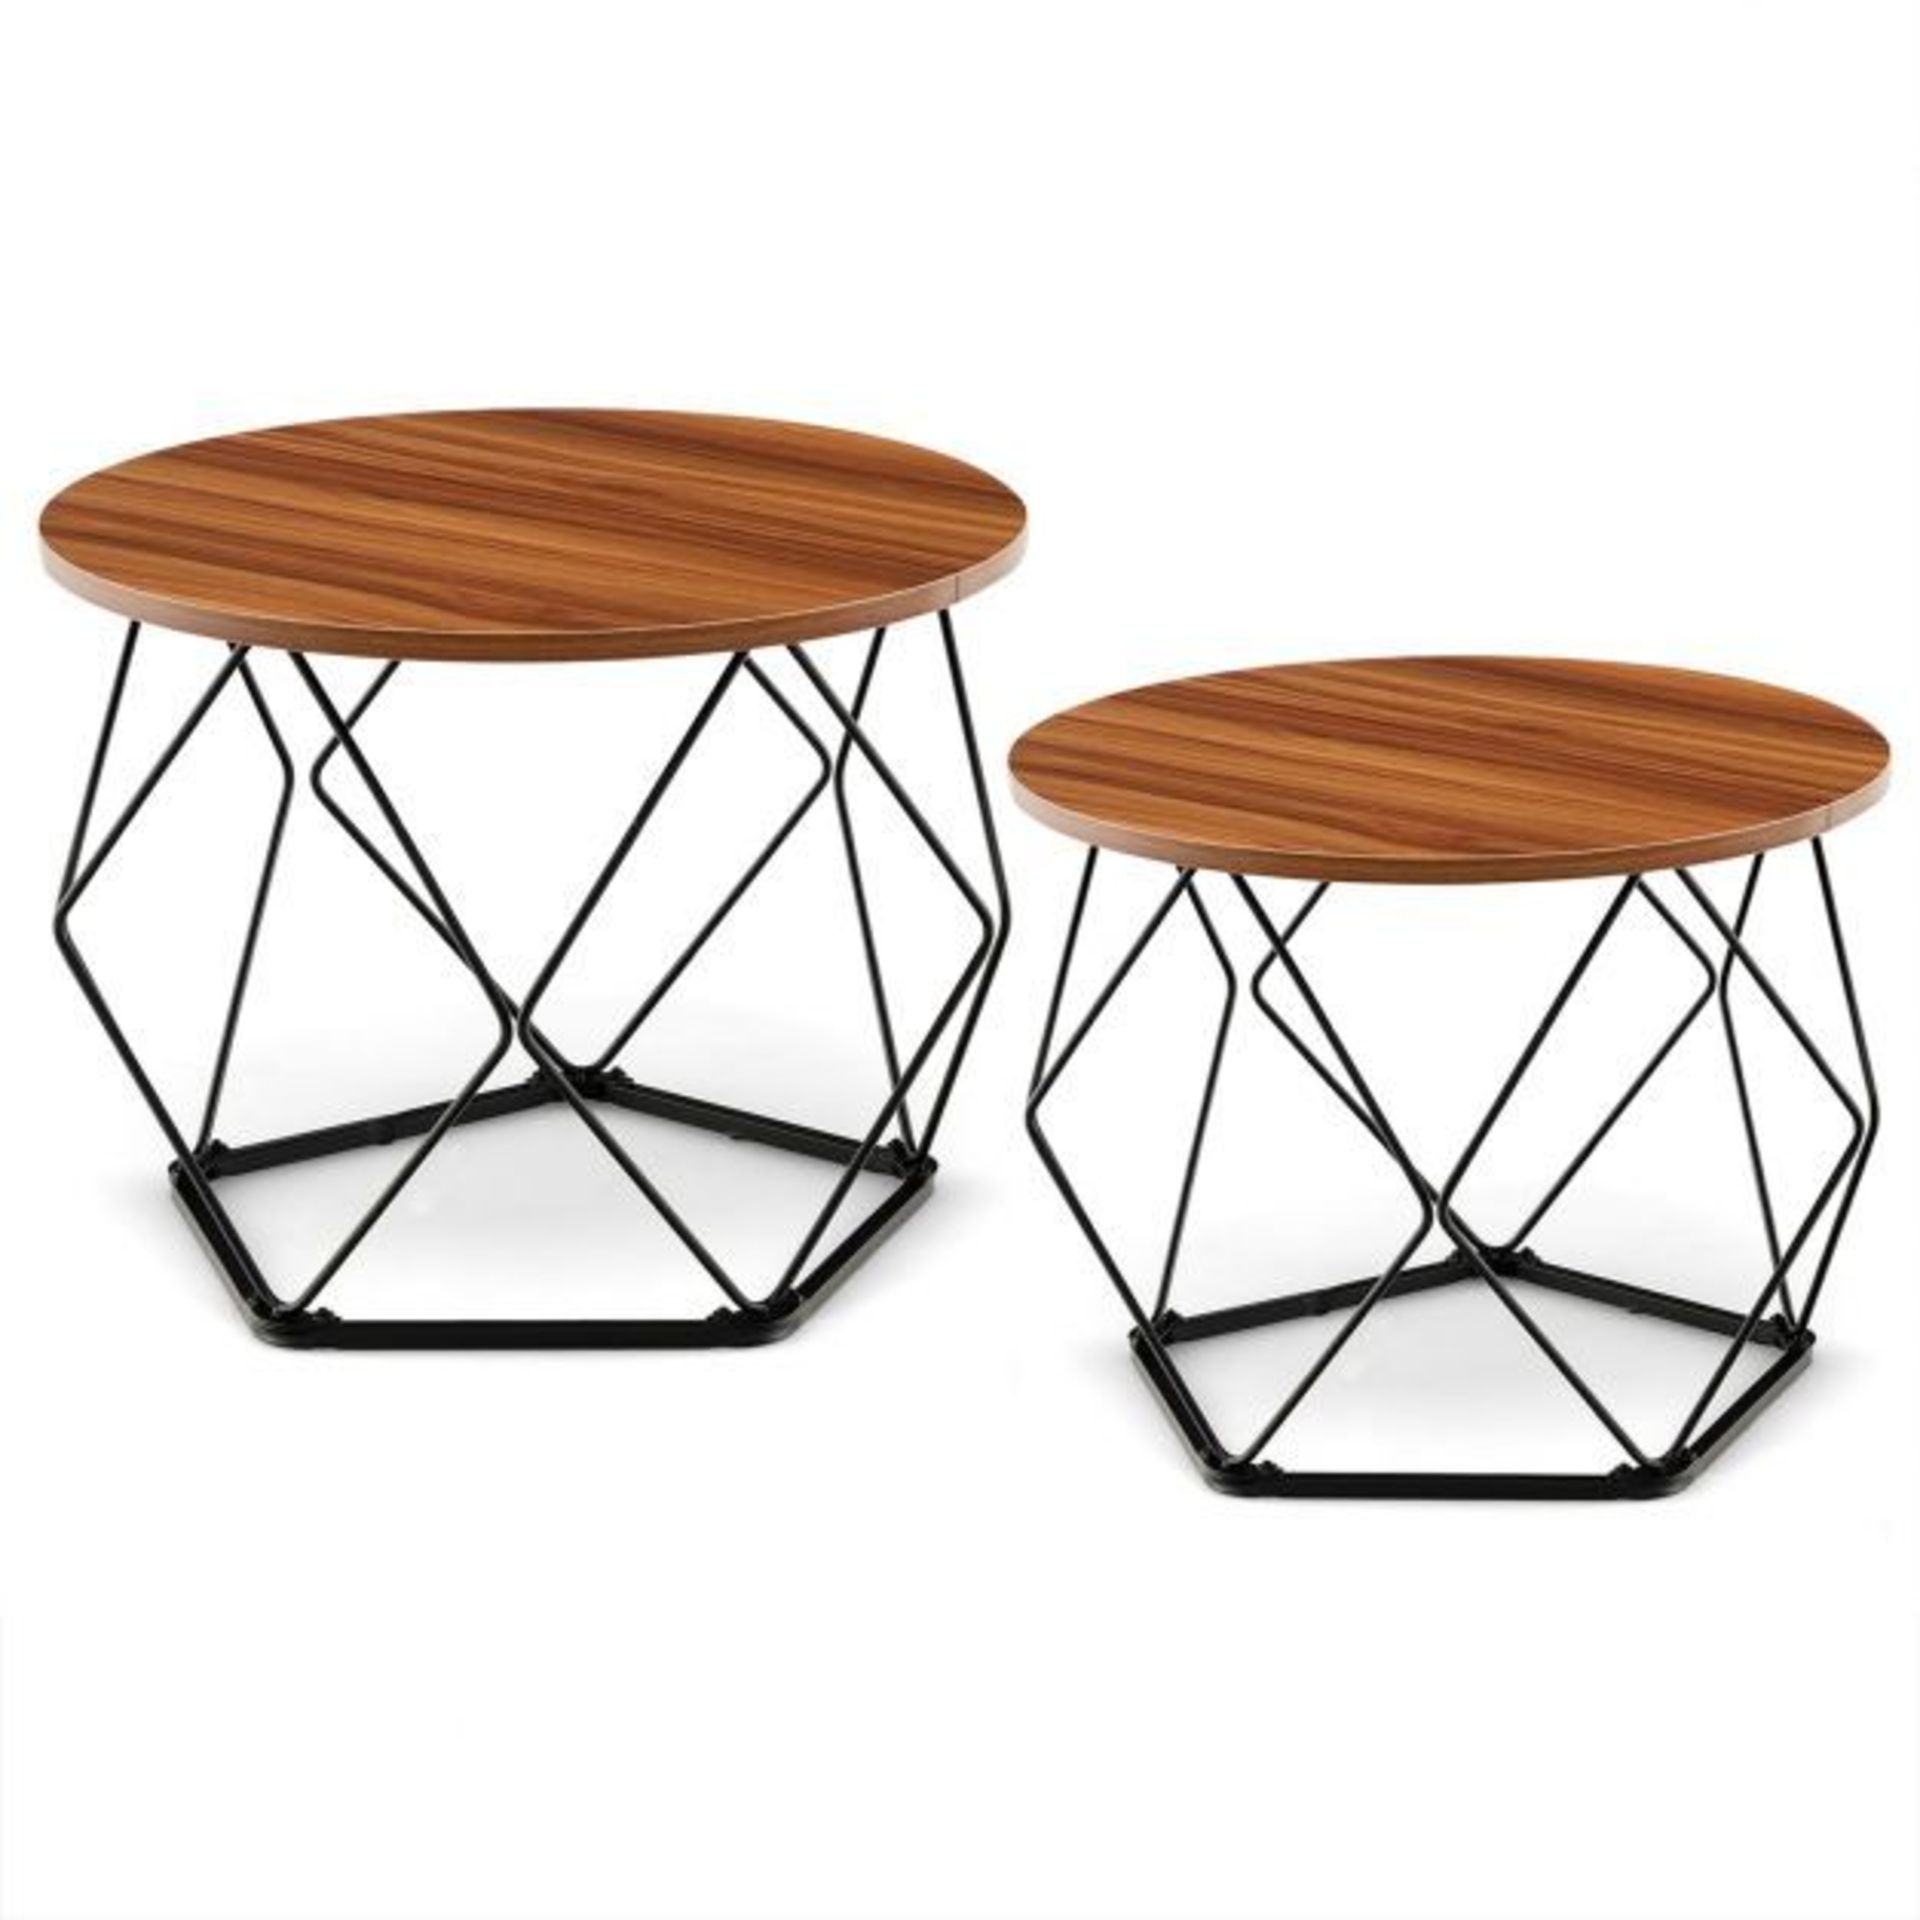 2 Pcs Coffee Tables Set with Pentagonal Base for Living Room. - ER53. The coffee table set of 2 is a